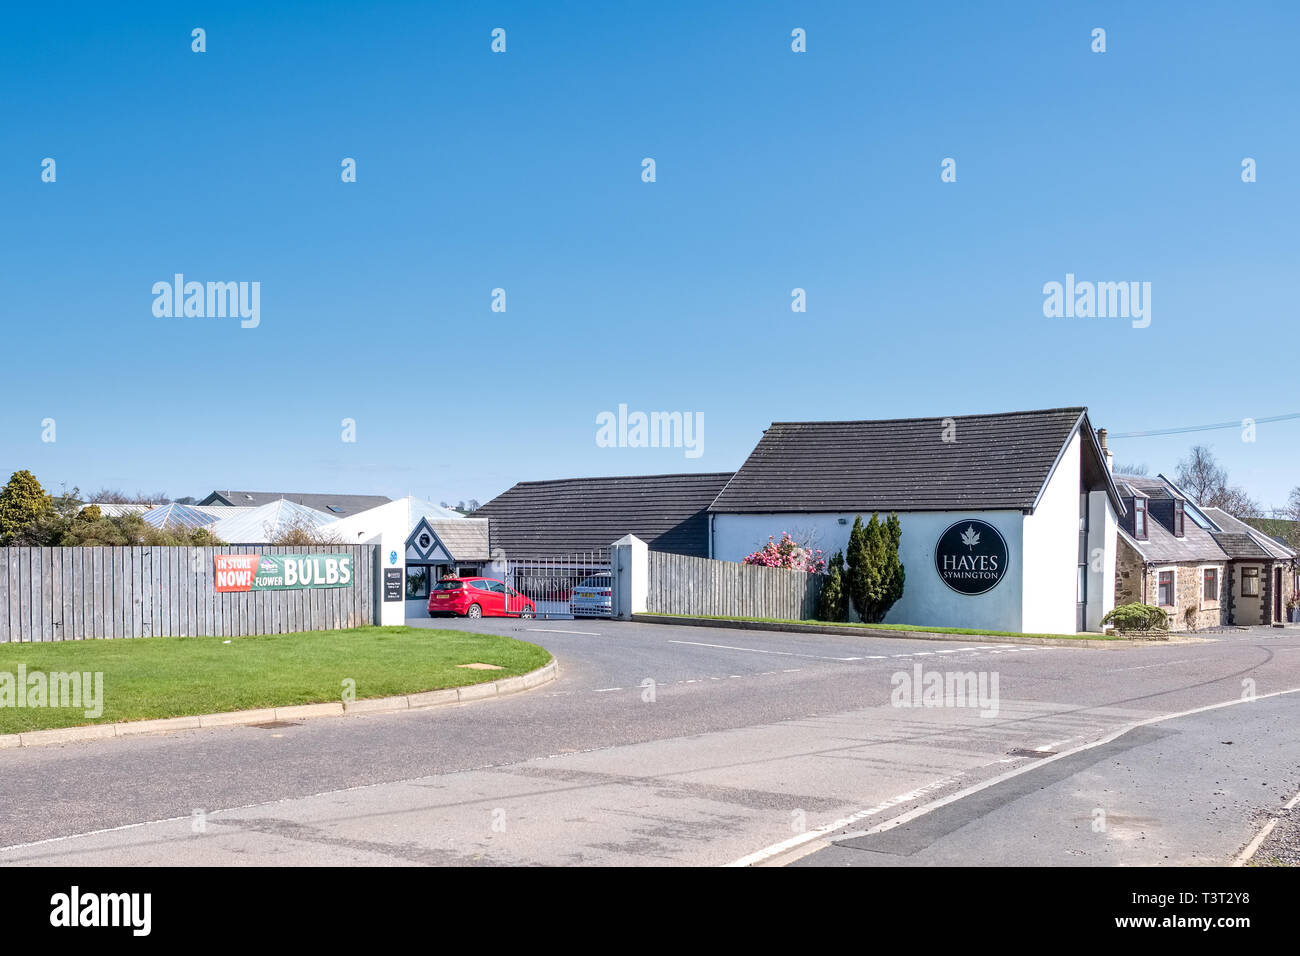 Ayr, Scotland, April 09, 2019: The front entrance to Hayes Garden Centre one of many that serve the area of South Ayrshire in Scotland Stock Photo